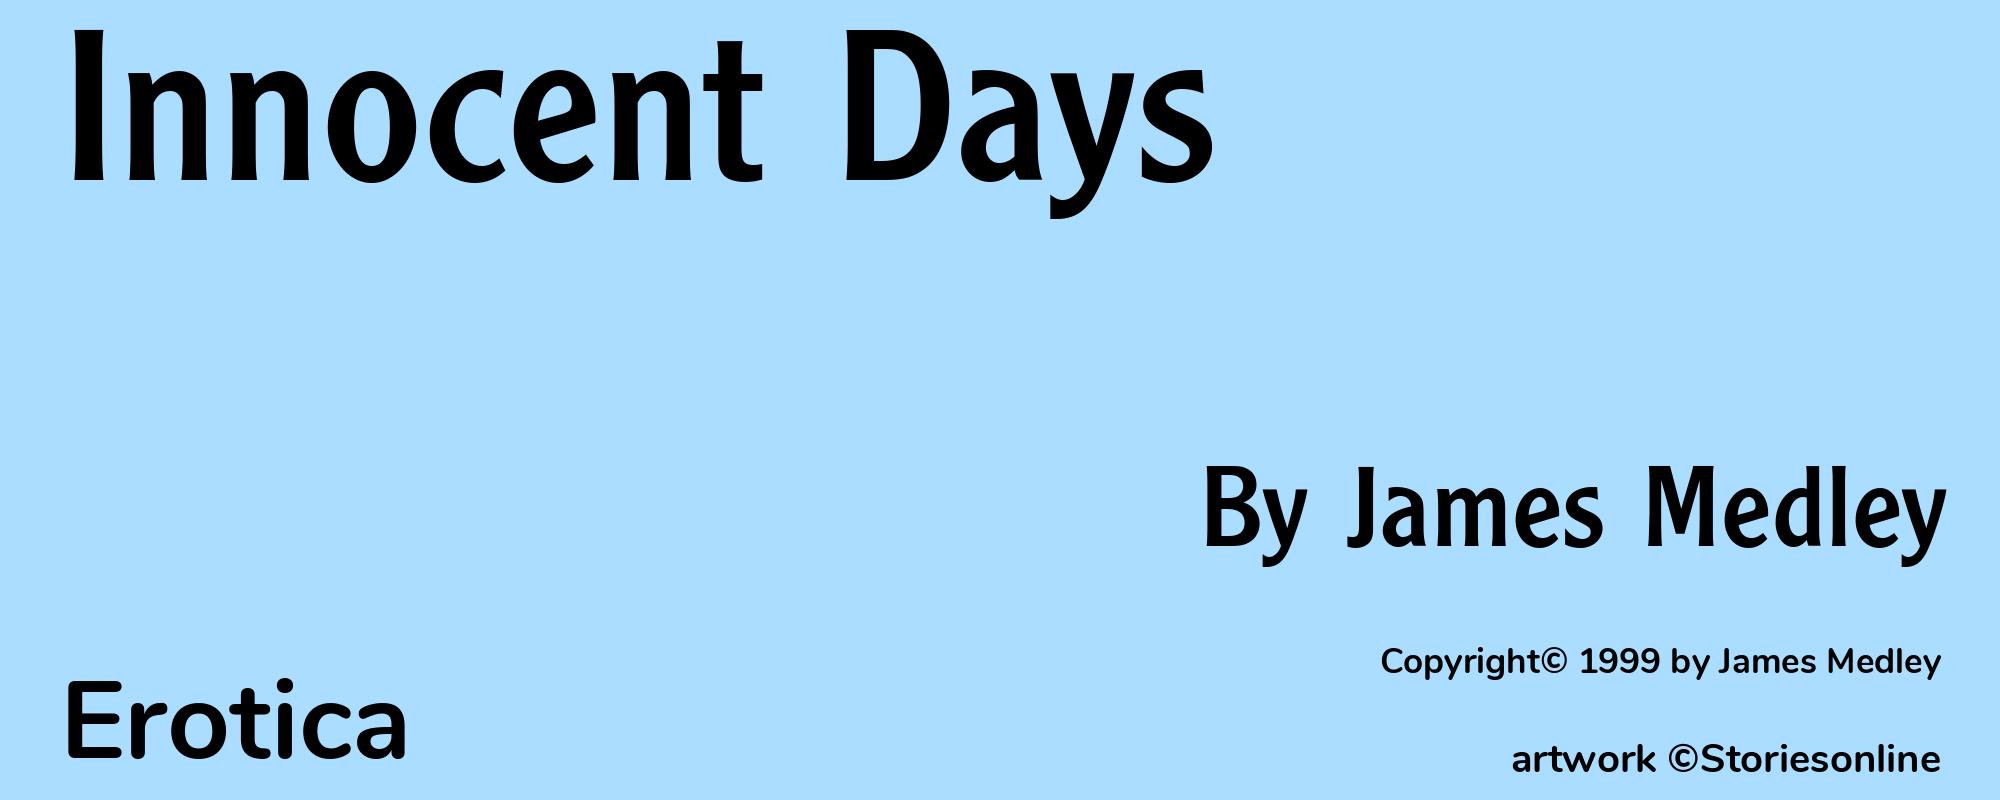 Innocent Days - Cover